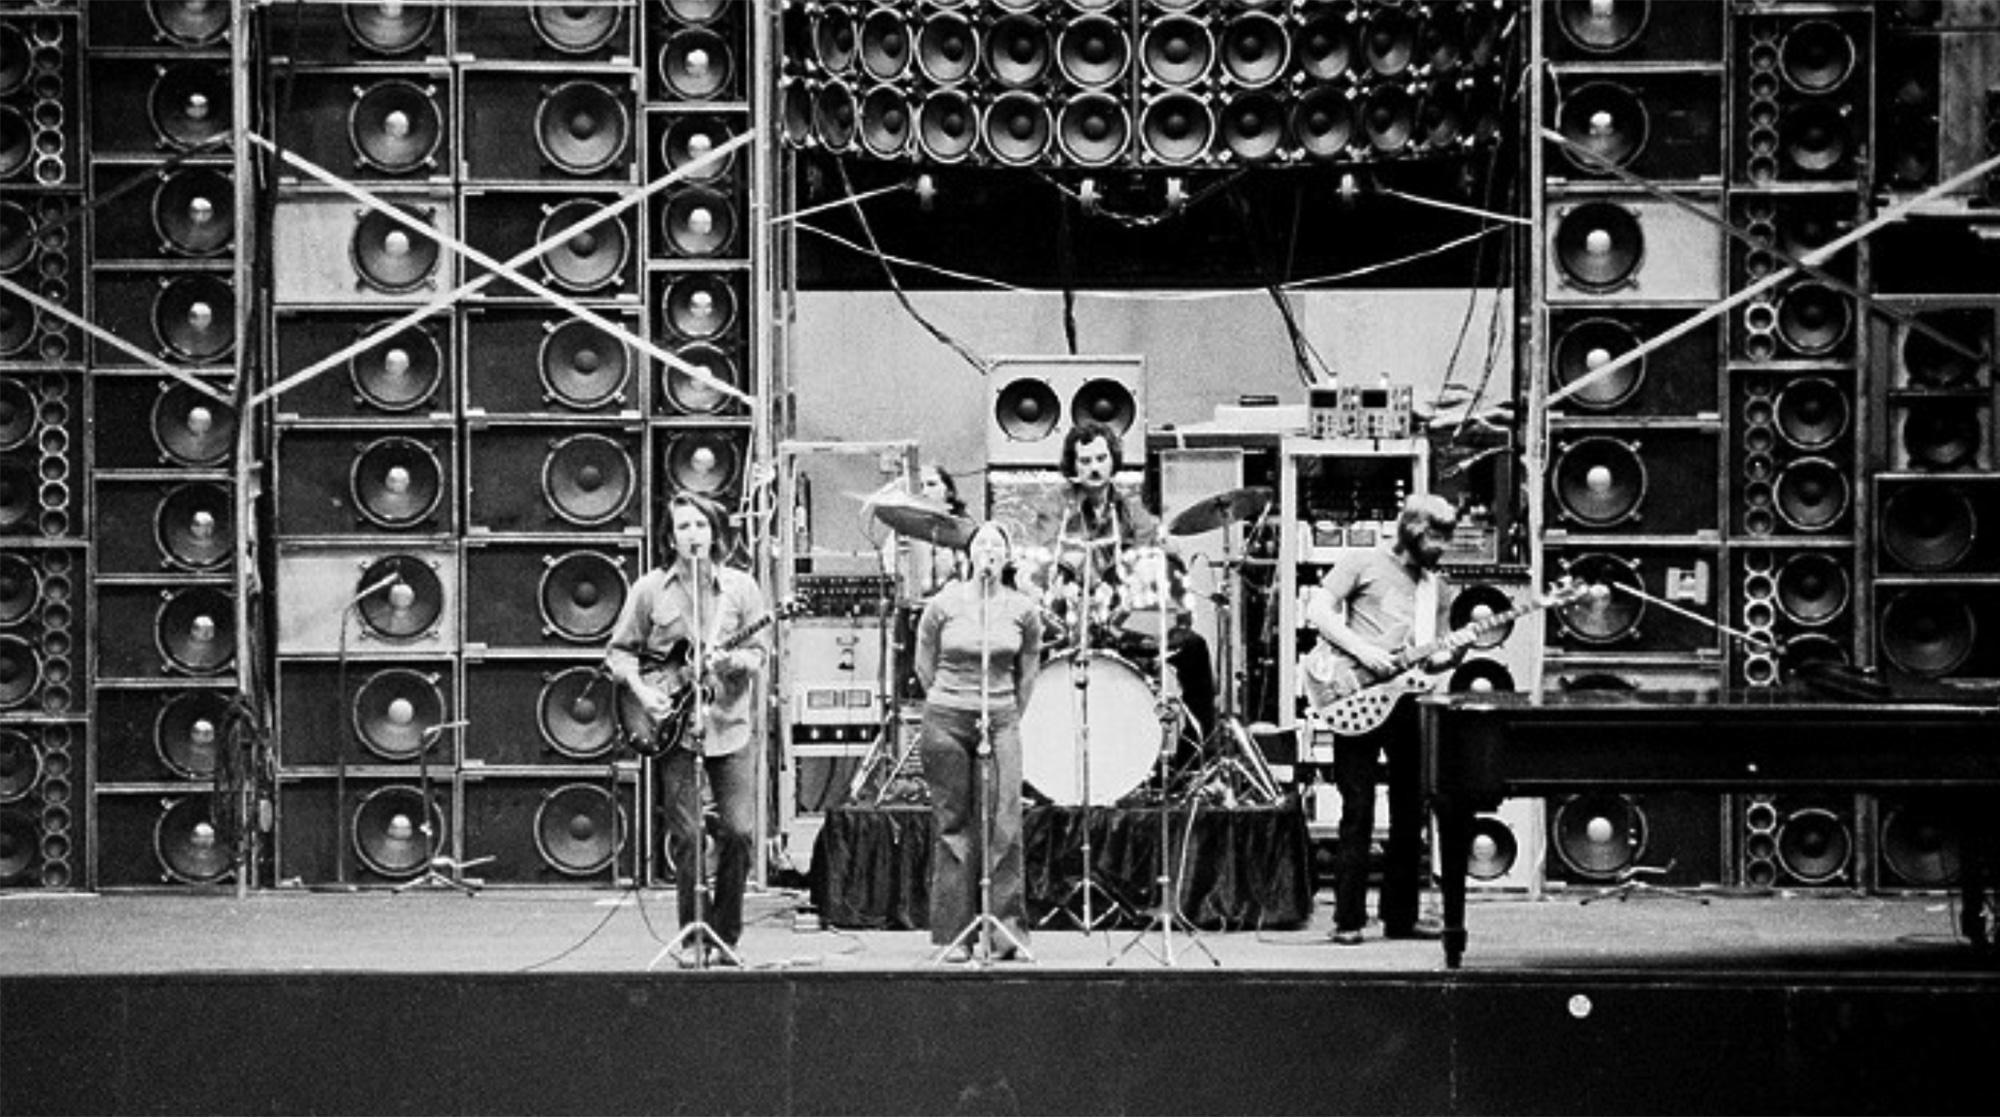 Grateful Dead’s Northwest concerts from the ’70s are lovingly